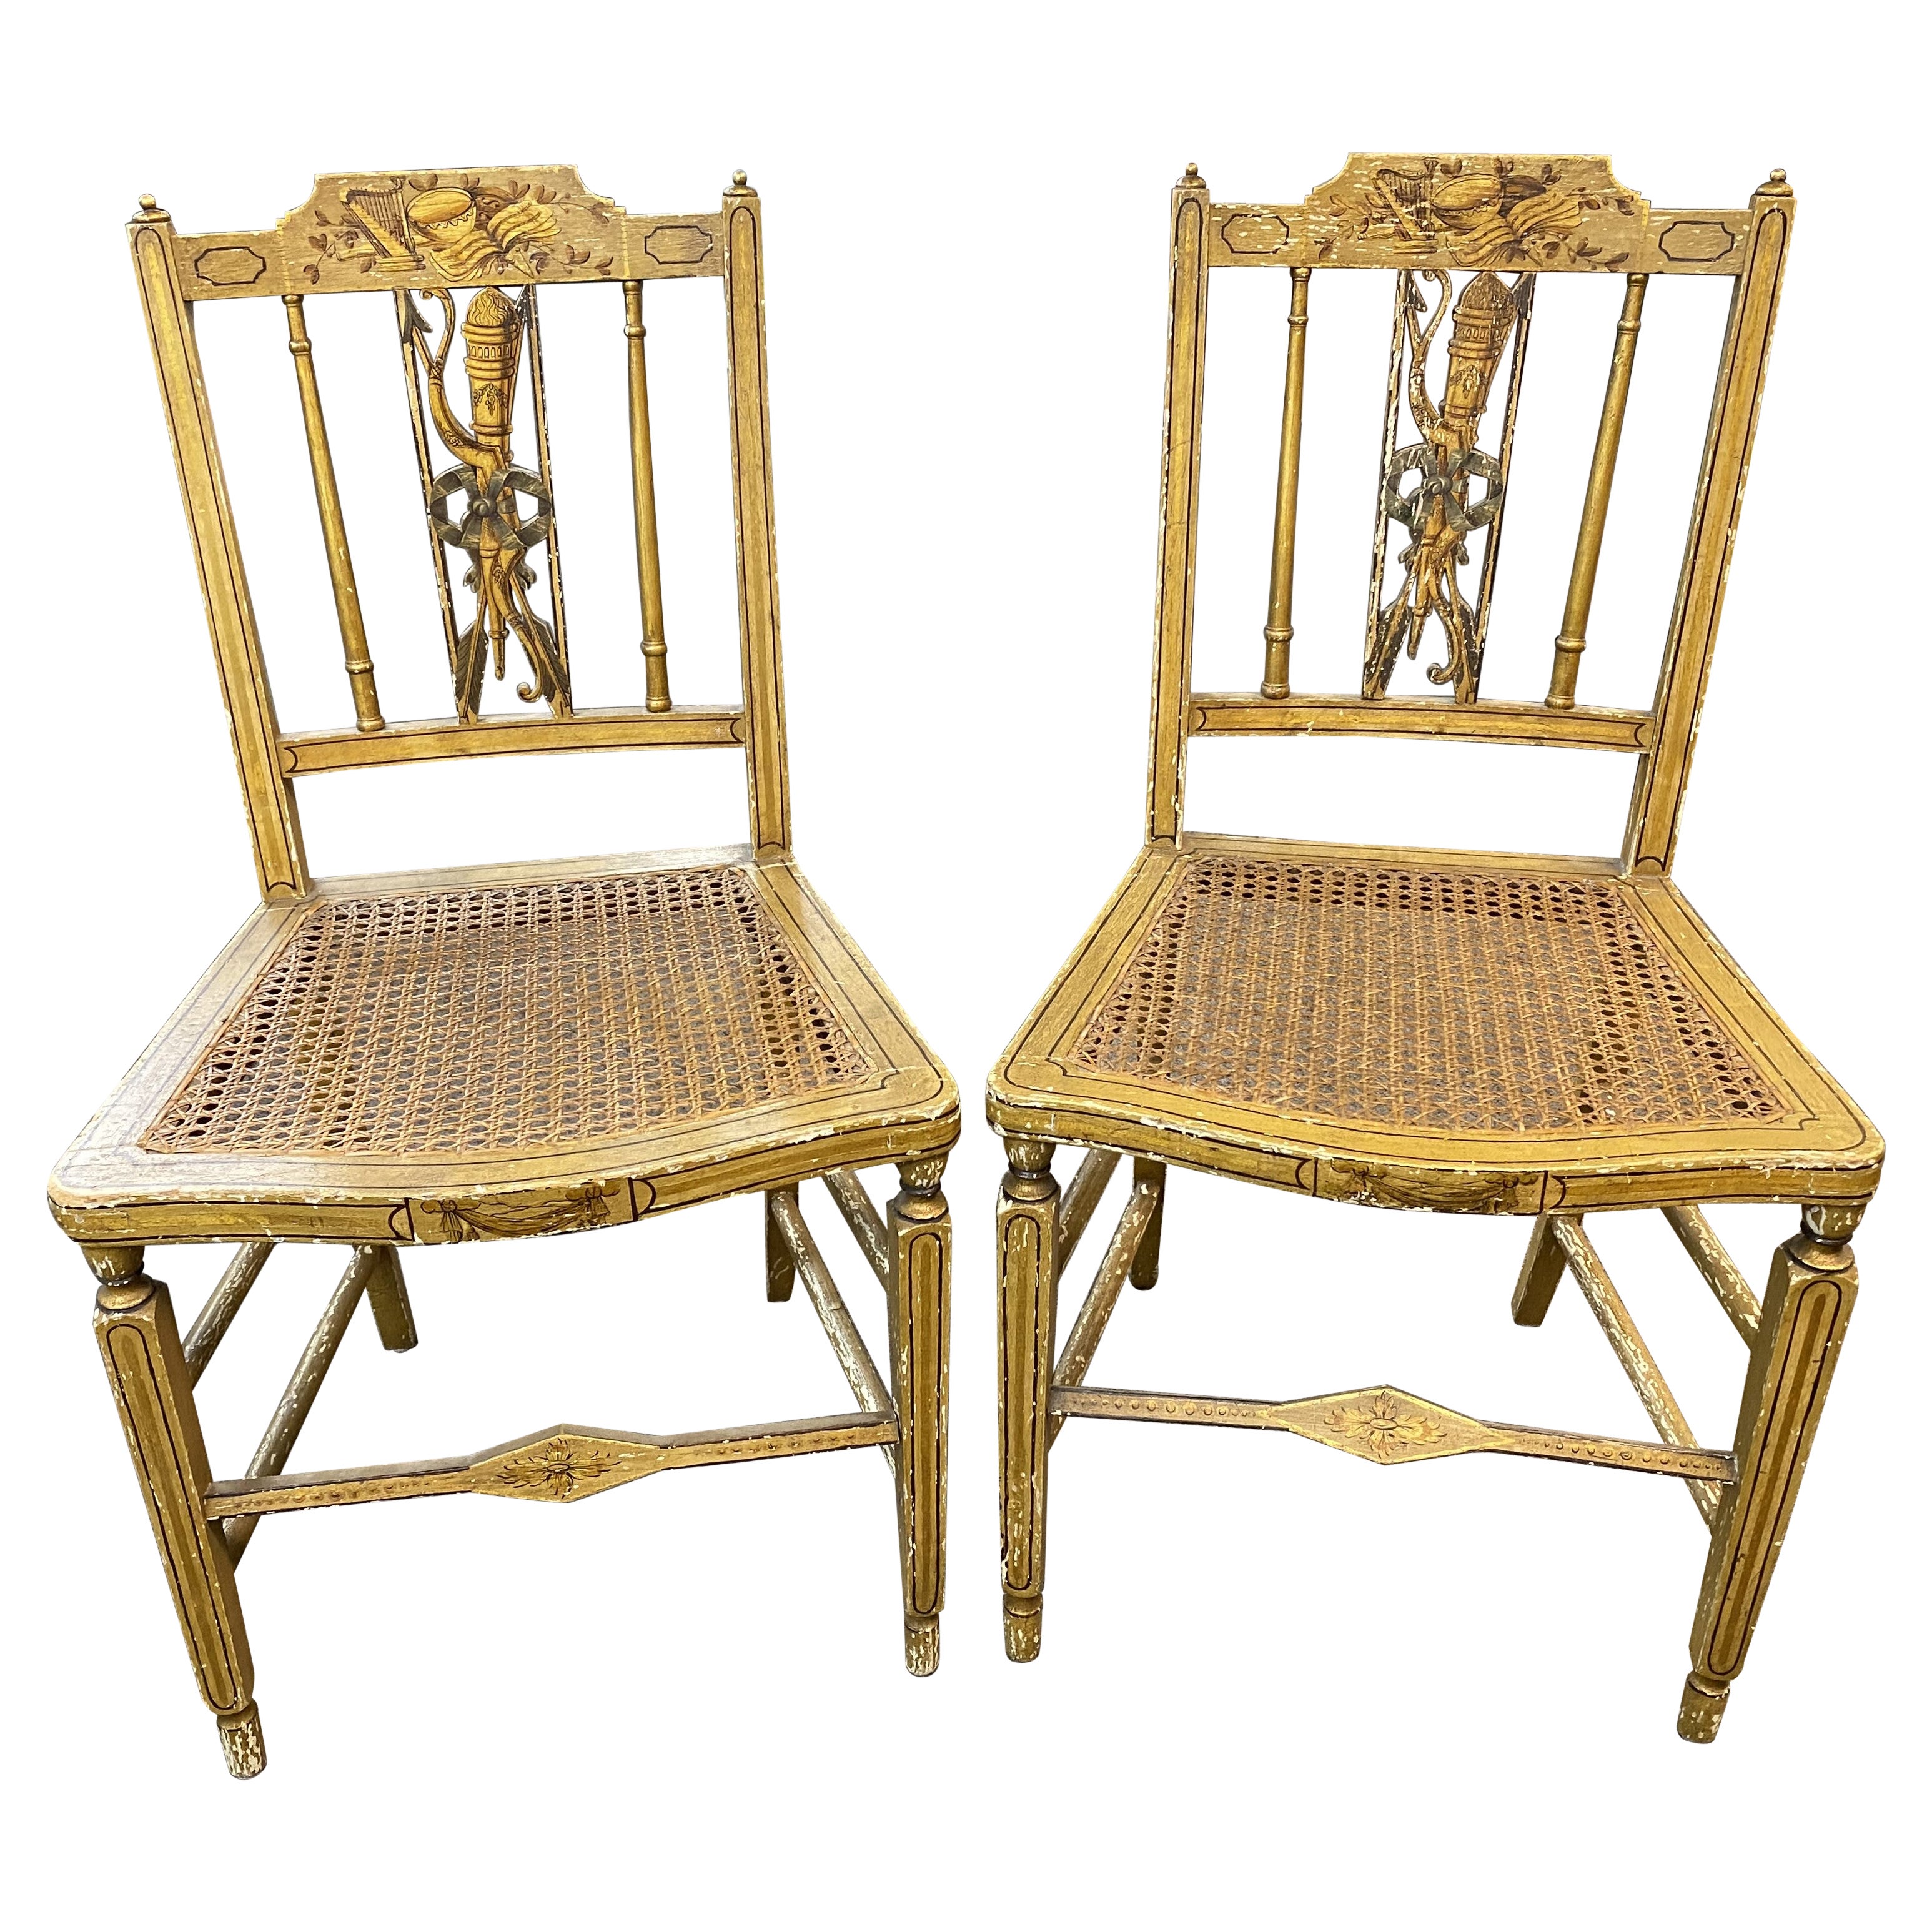 Pair of Lewis Barnes Hand Painted Cane Seat Fancy Chairs, Portsmouth NH c 1820